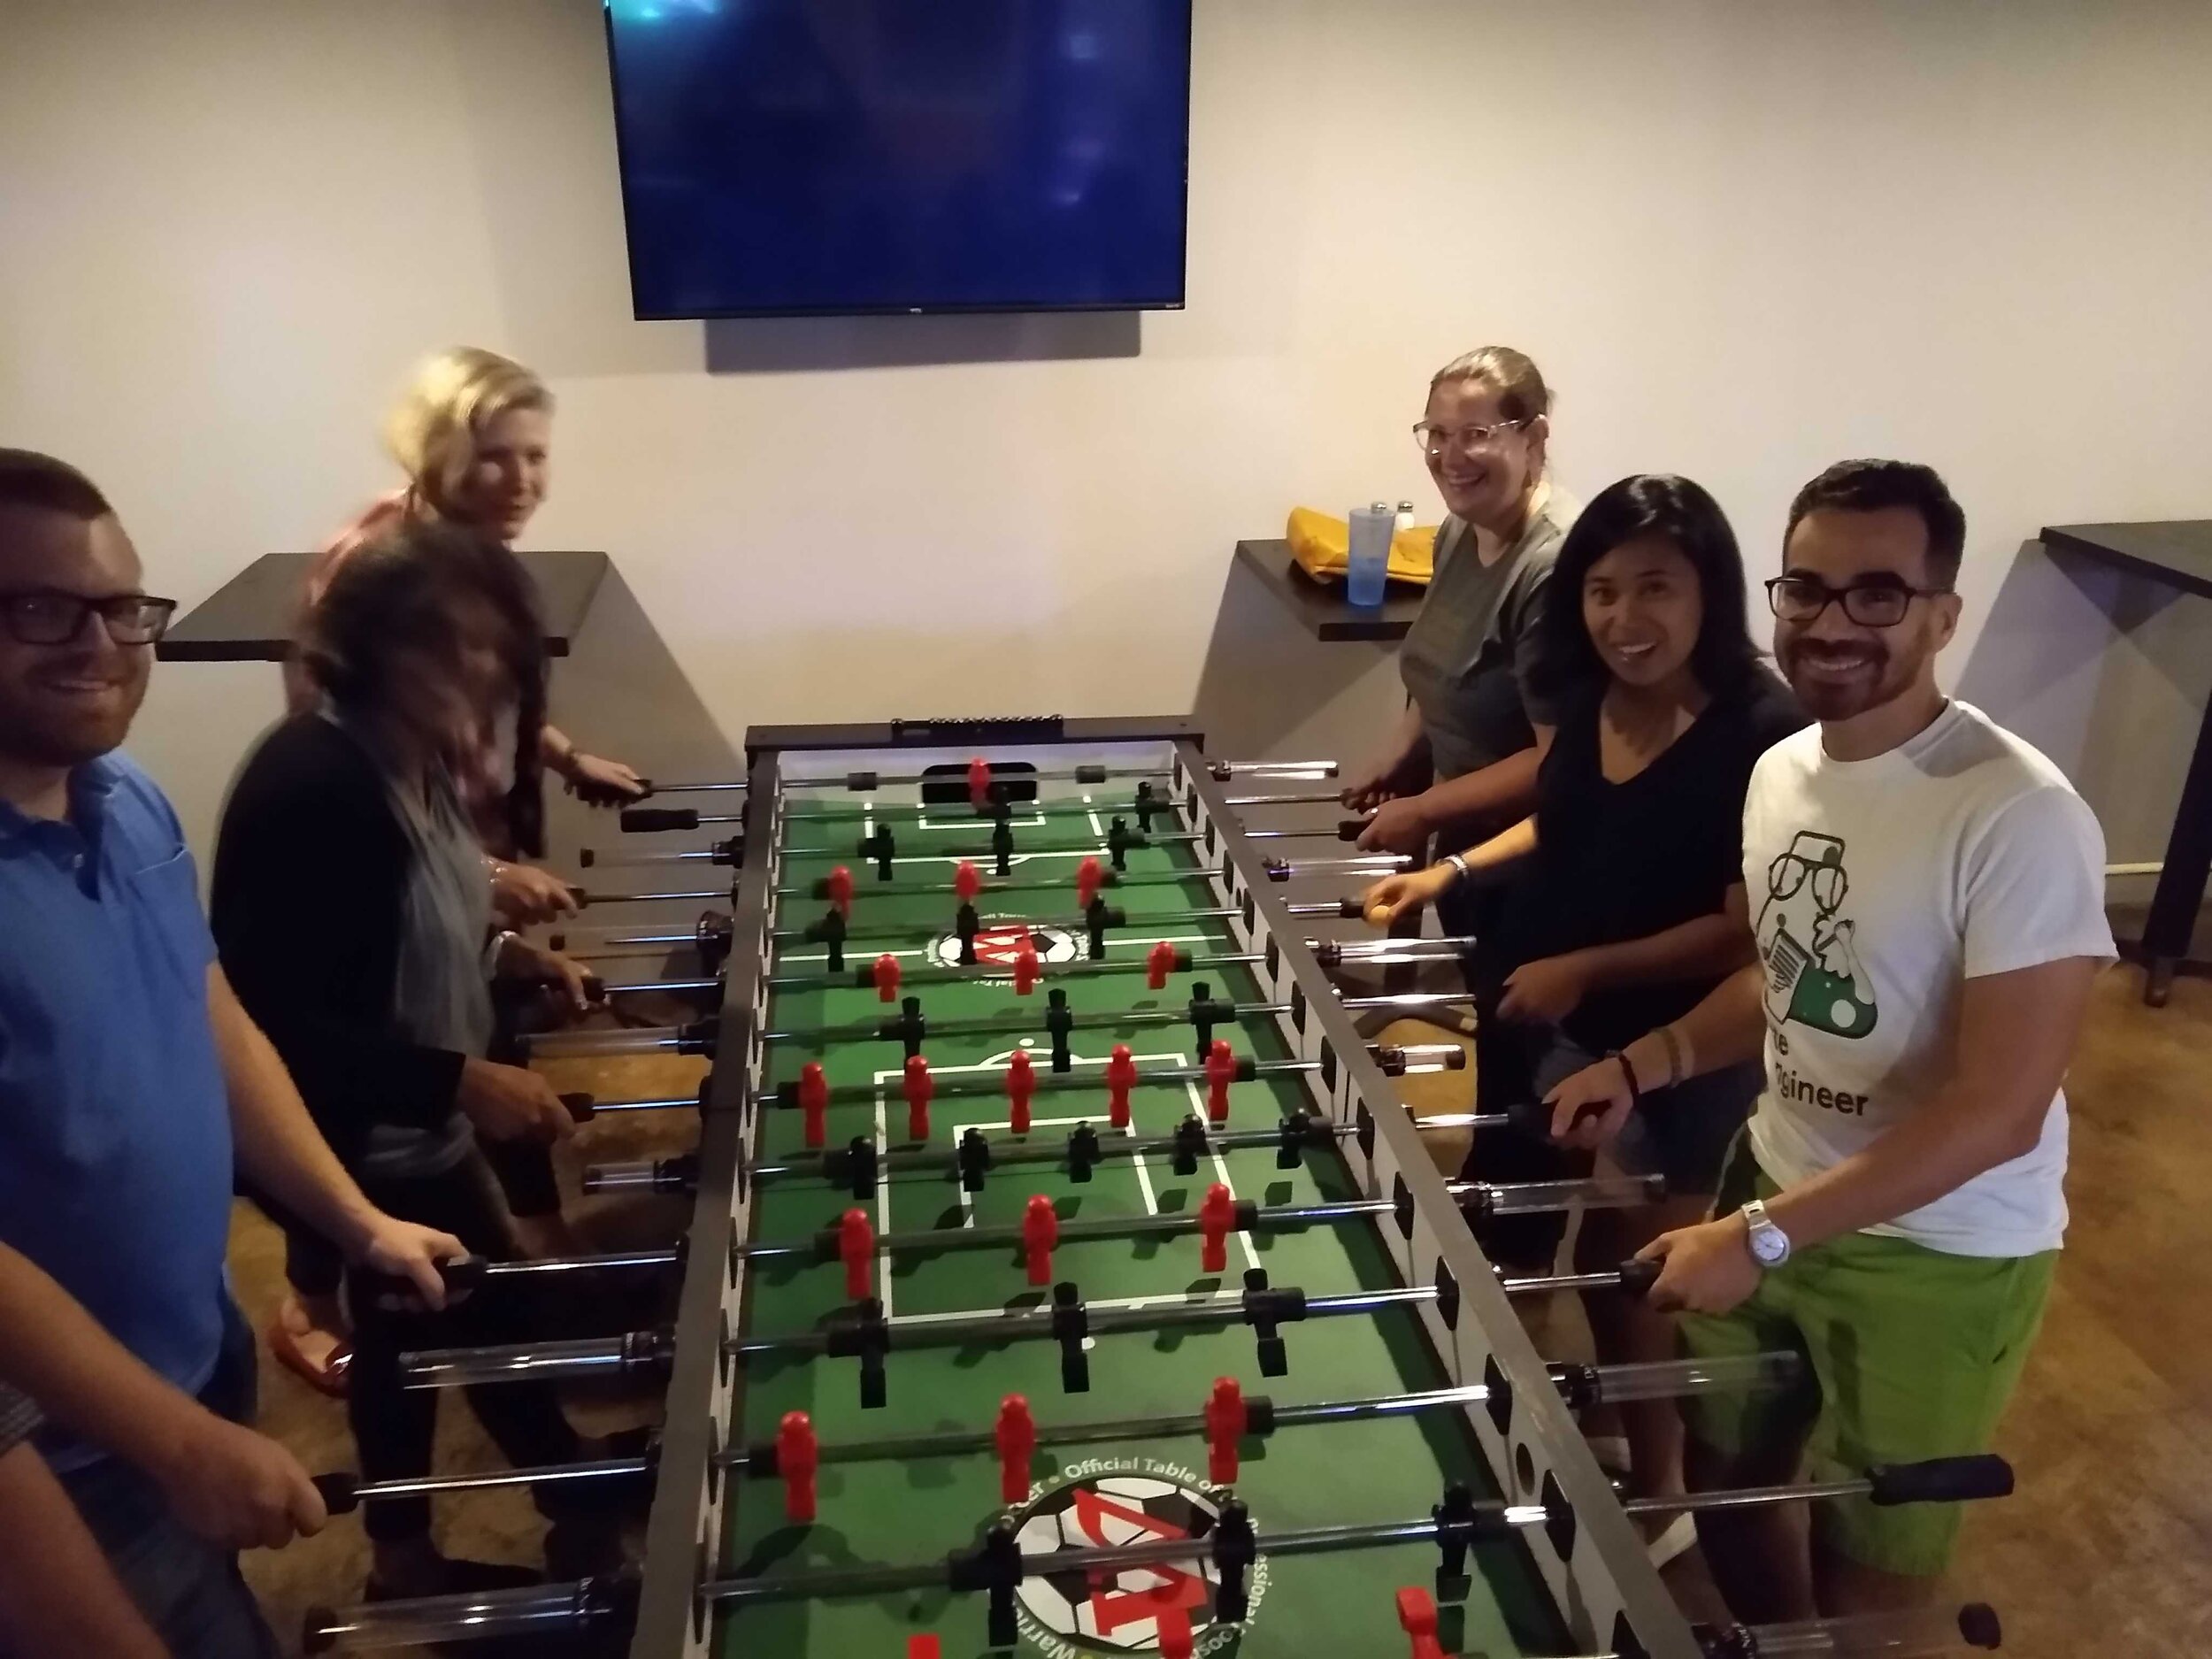  Our teams playing foosball together 